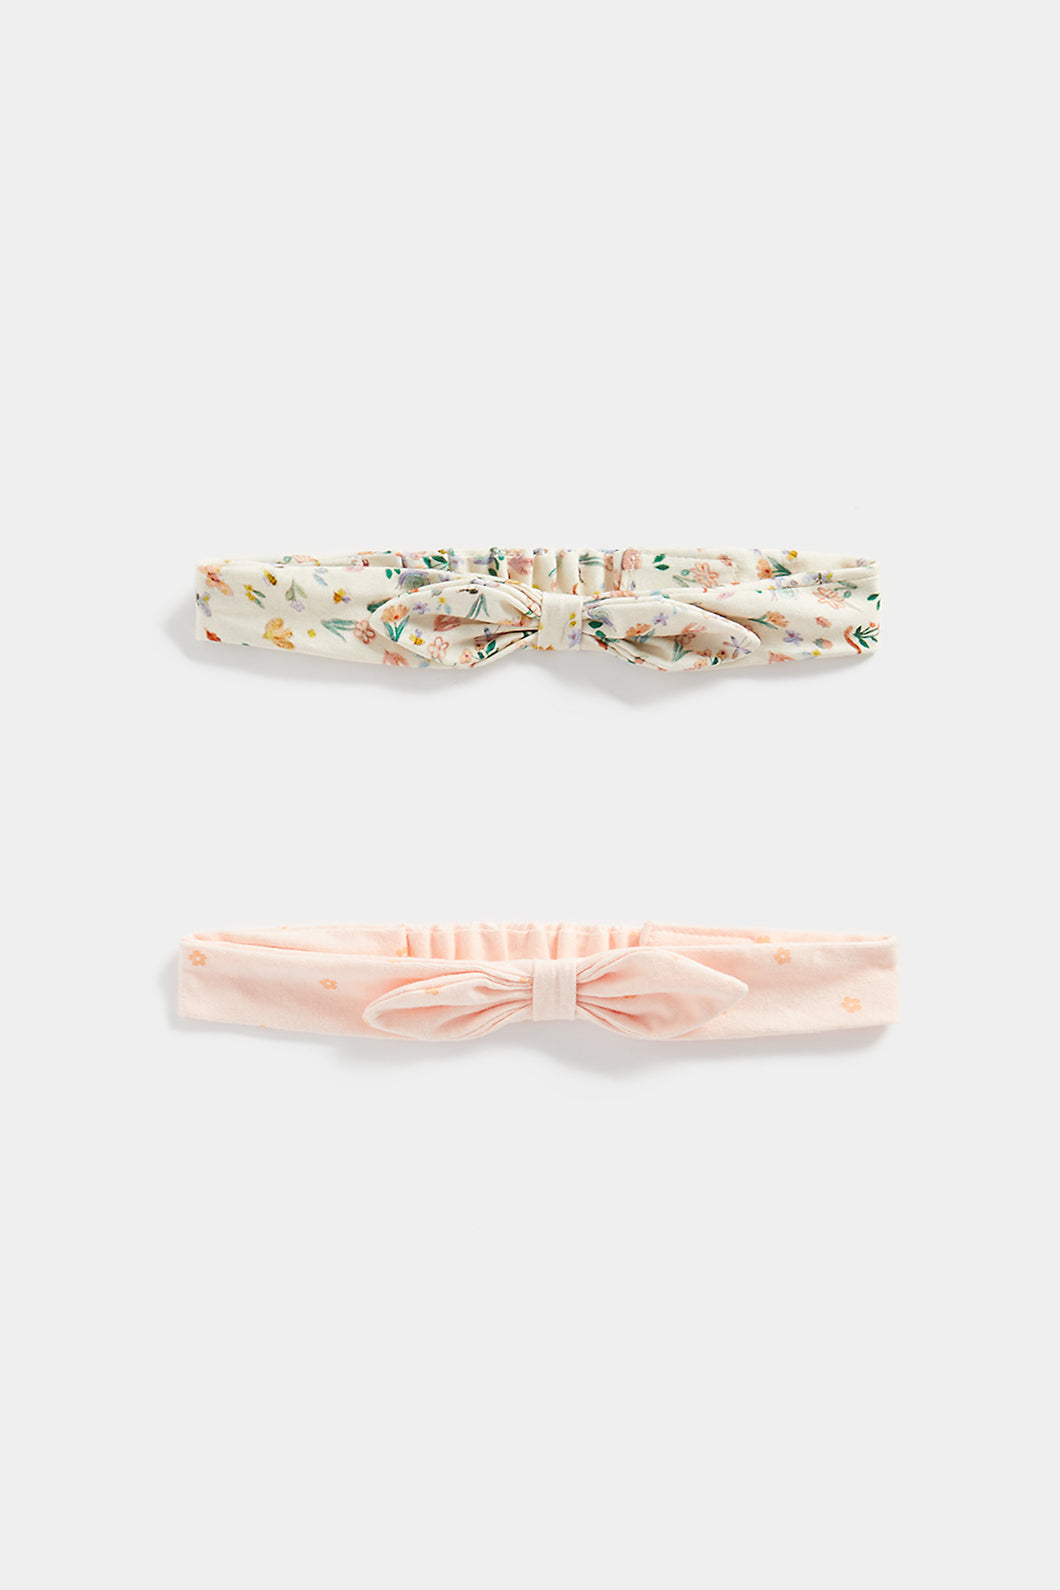 Mothercare Floral Headbands - 2 Pack